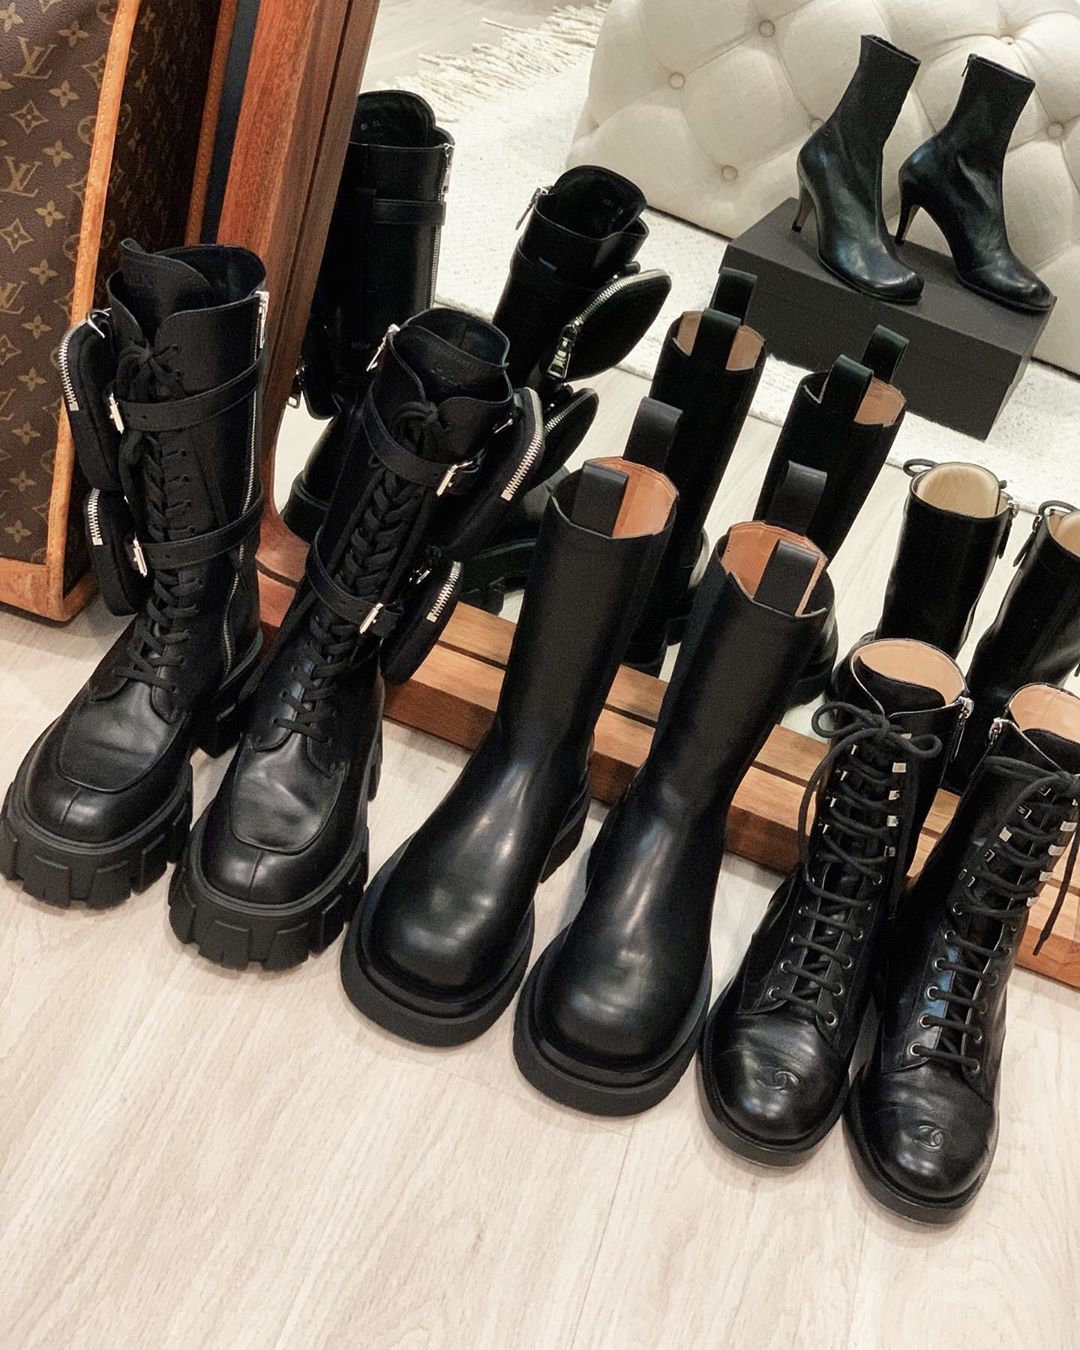 18 Pairs of Black Ankle Boots to Shop for Fall